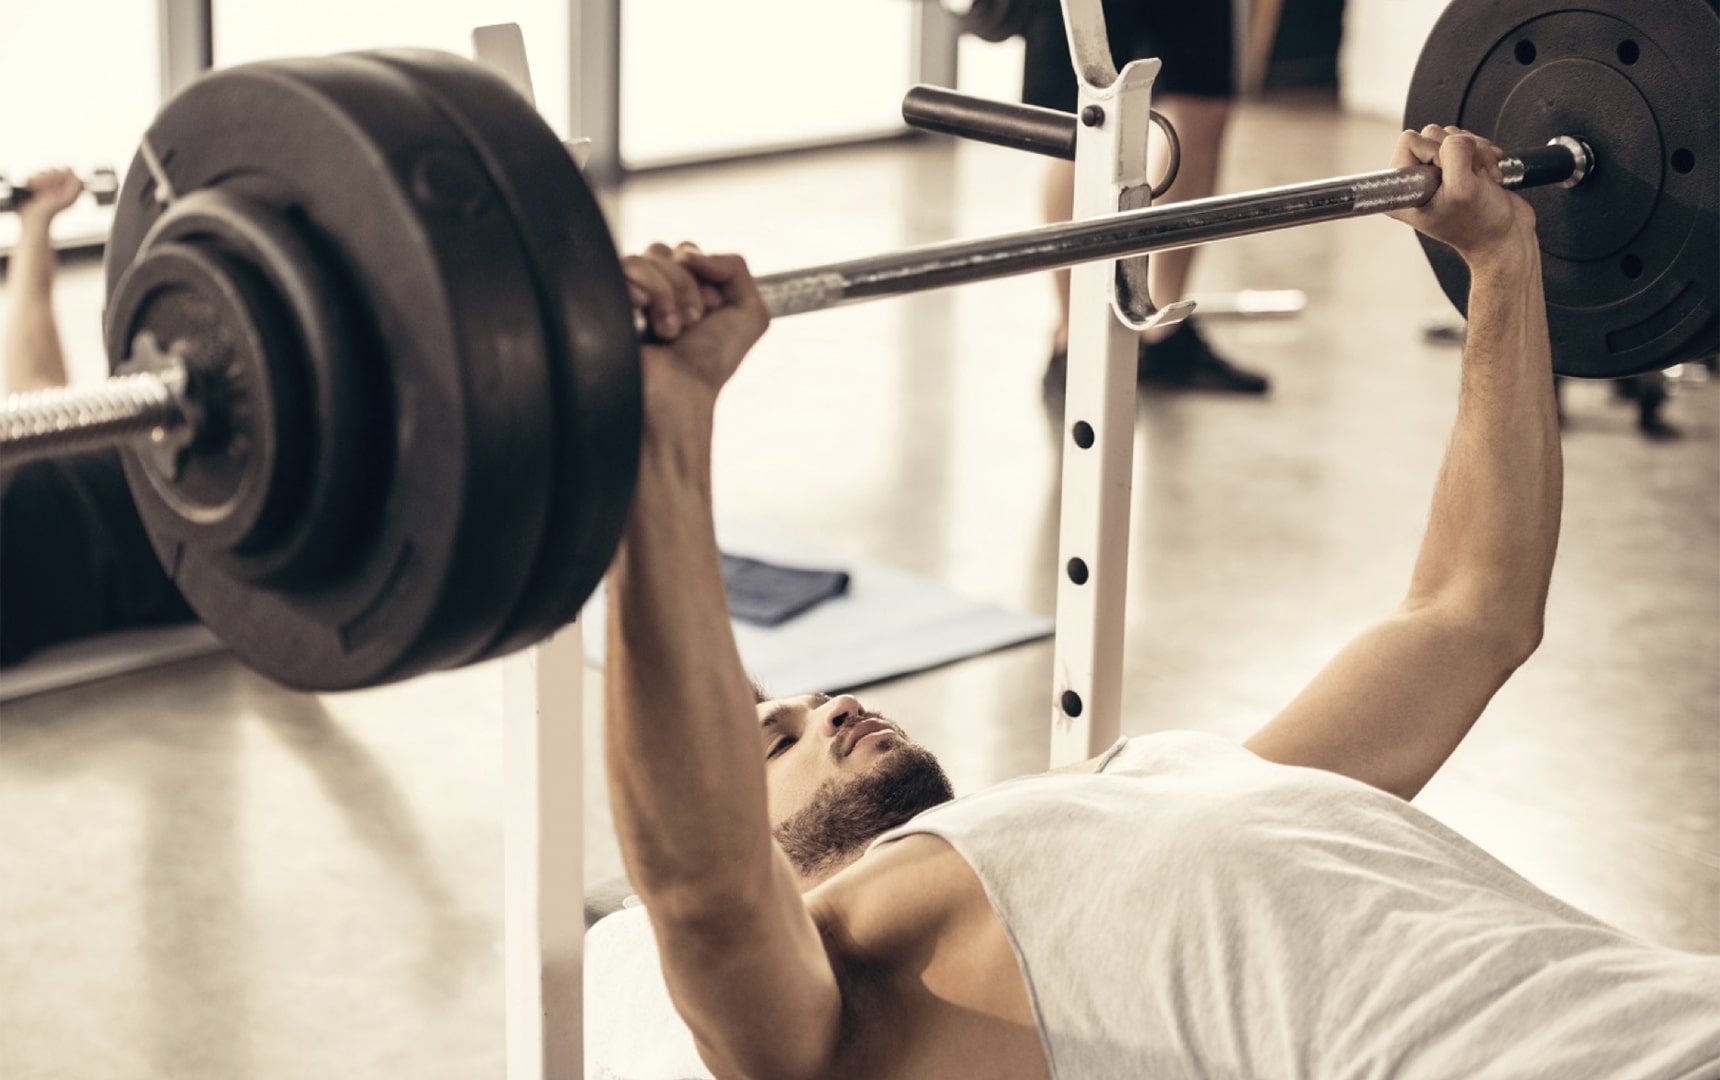 How to improve bench press